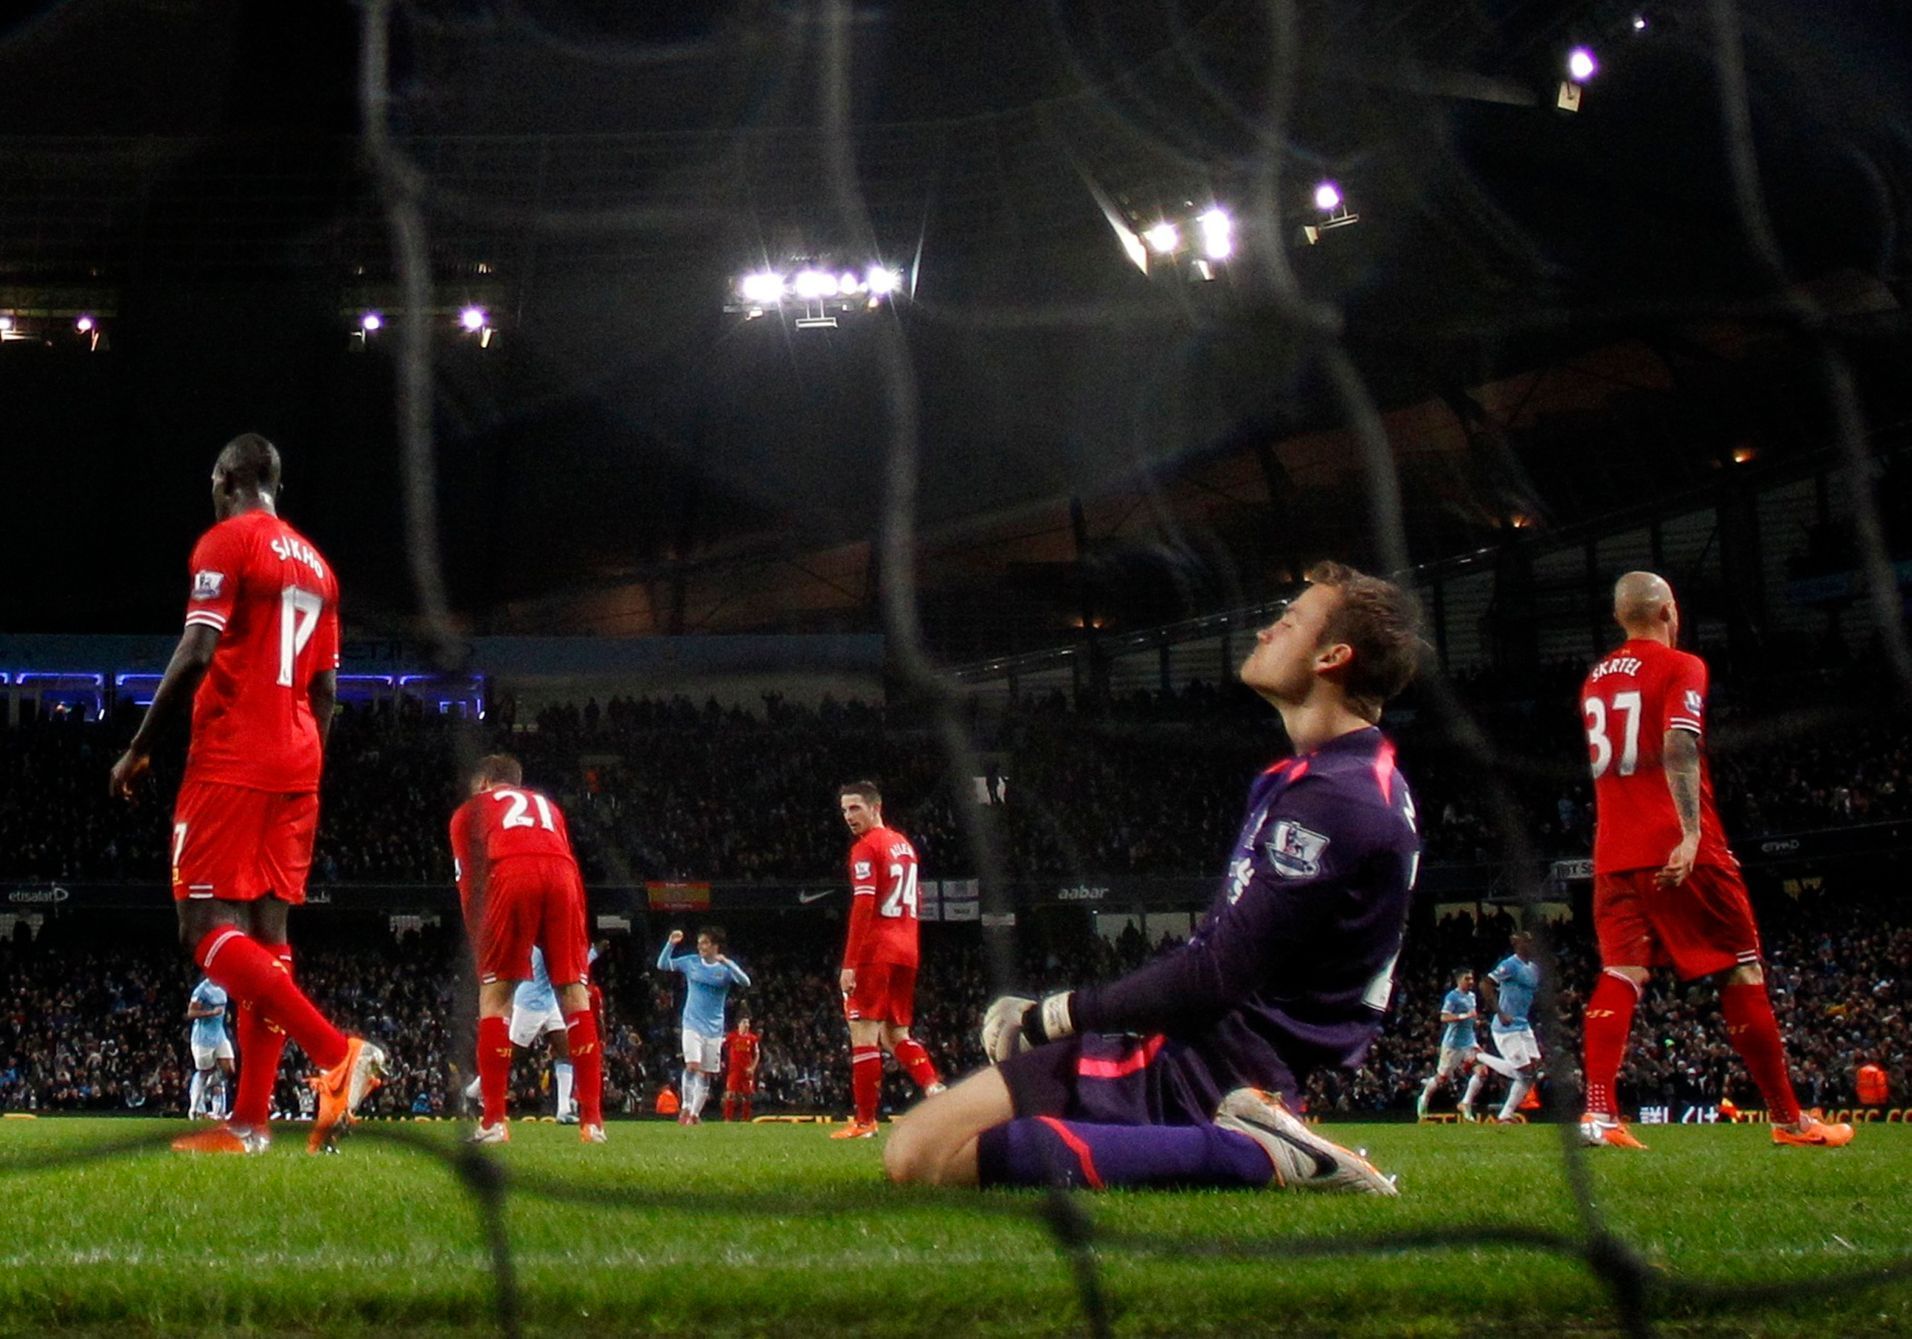 Liverpool's goalkeeper Mignolet reacts after Manchester City's Negredo scores a goal  during their English Premier League soccer match at the Etihad stadium in Manchester